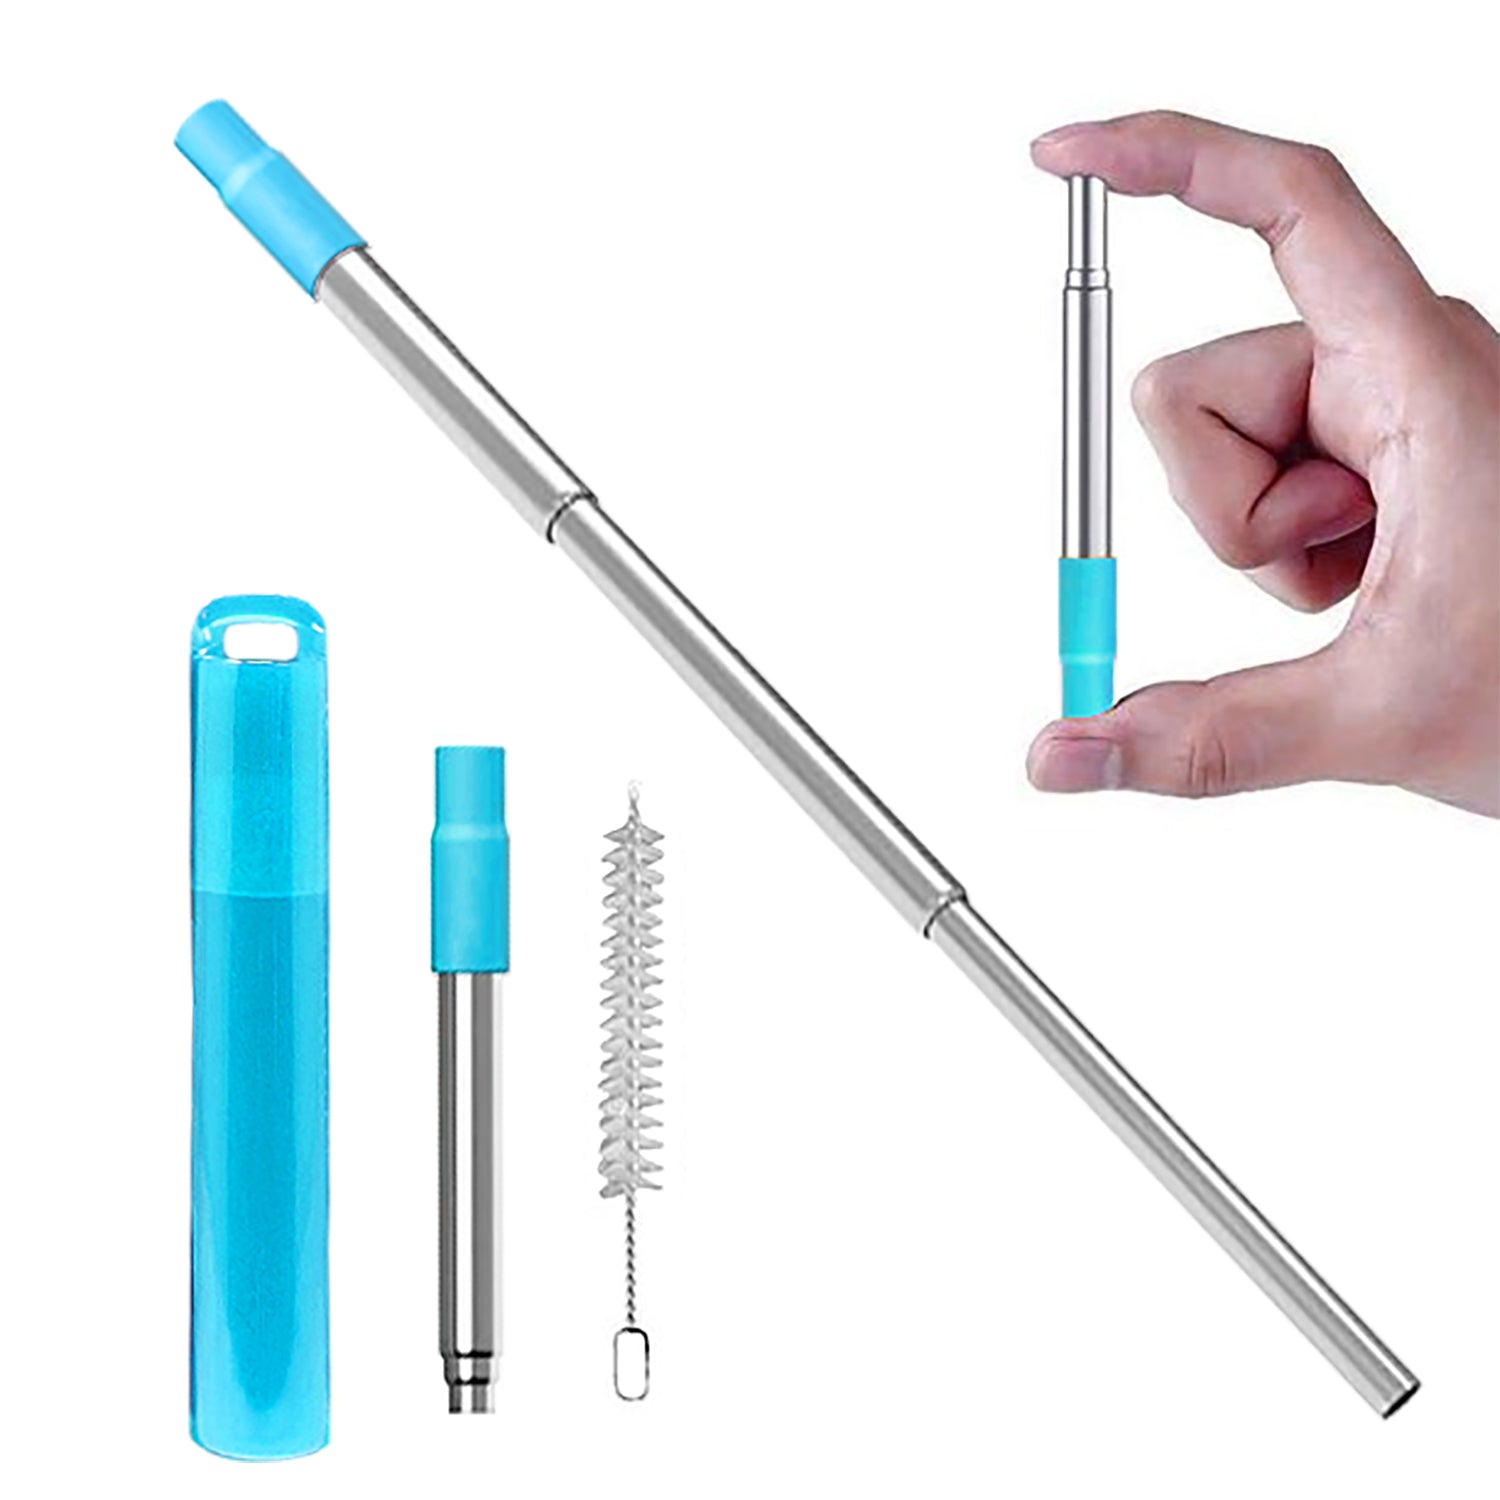 Our Collapsible Reusable Straws, with its telescopic design, is small and easy to carry. It is the safest, most sanitary way to use a straw when you are out of the house.  Eco-friendly materials made of high quality stainless steel reduces the chance of these straws ending up in the ocean and endangering vulnerable sea life. Every straw come with 1 stainless steel cleaning brush which is long enough to wash the entire straw. 